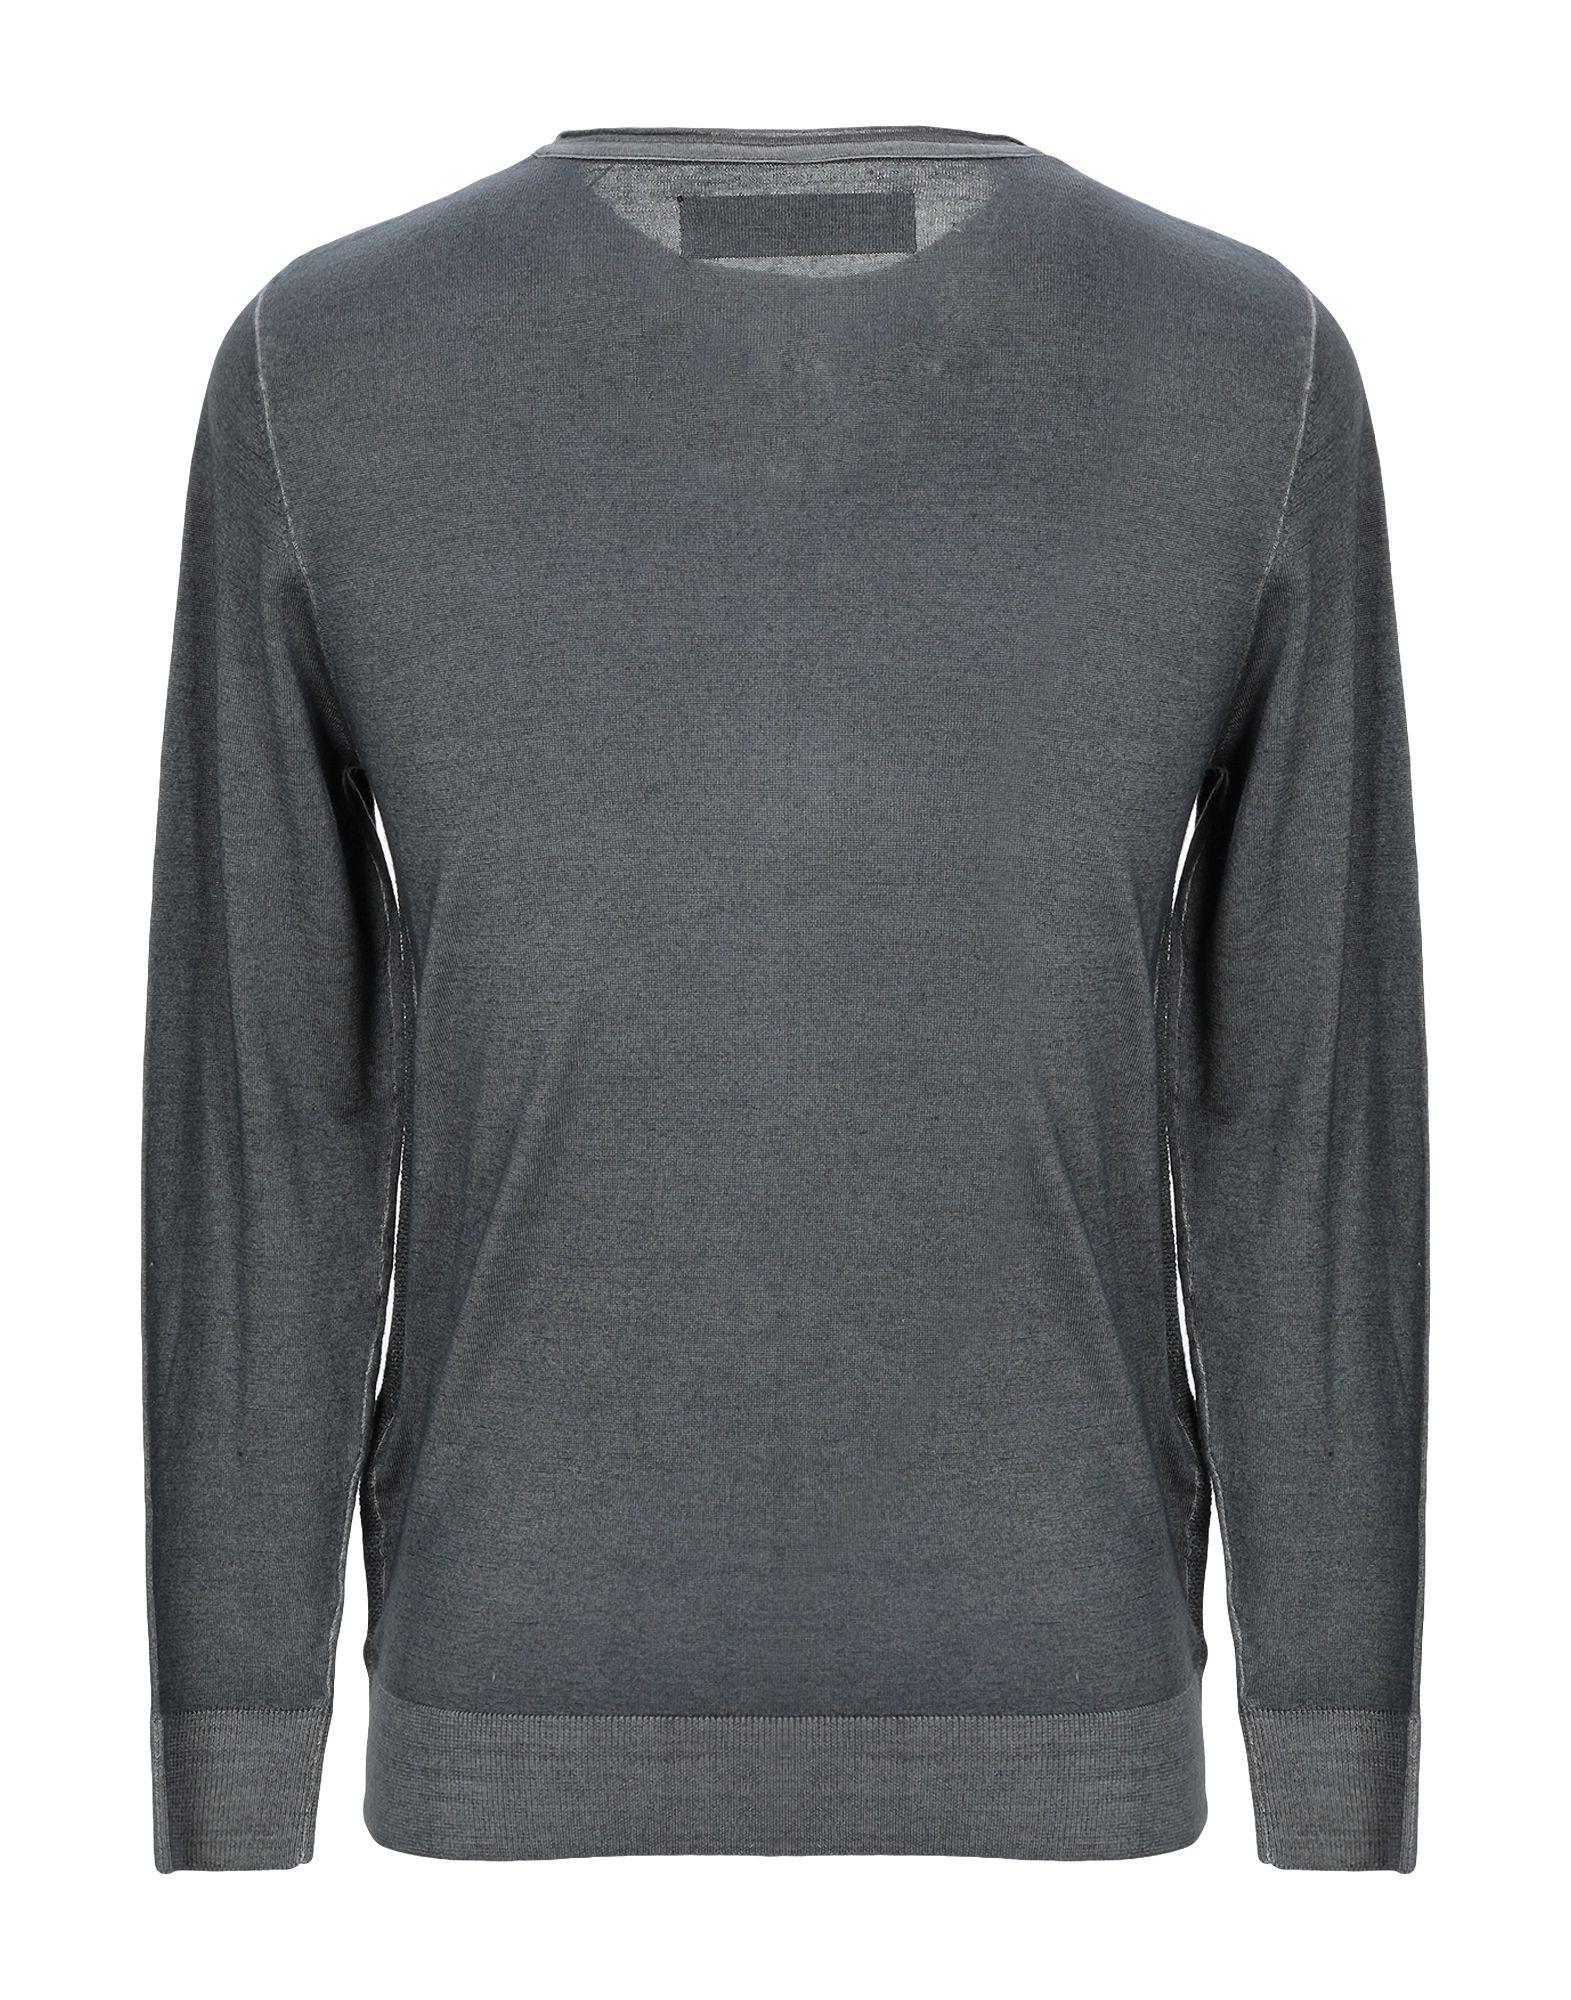 Replay Wool Sweater in Lead (Gray) for Men - Lyst